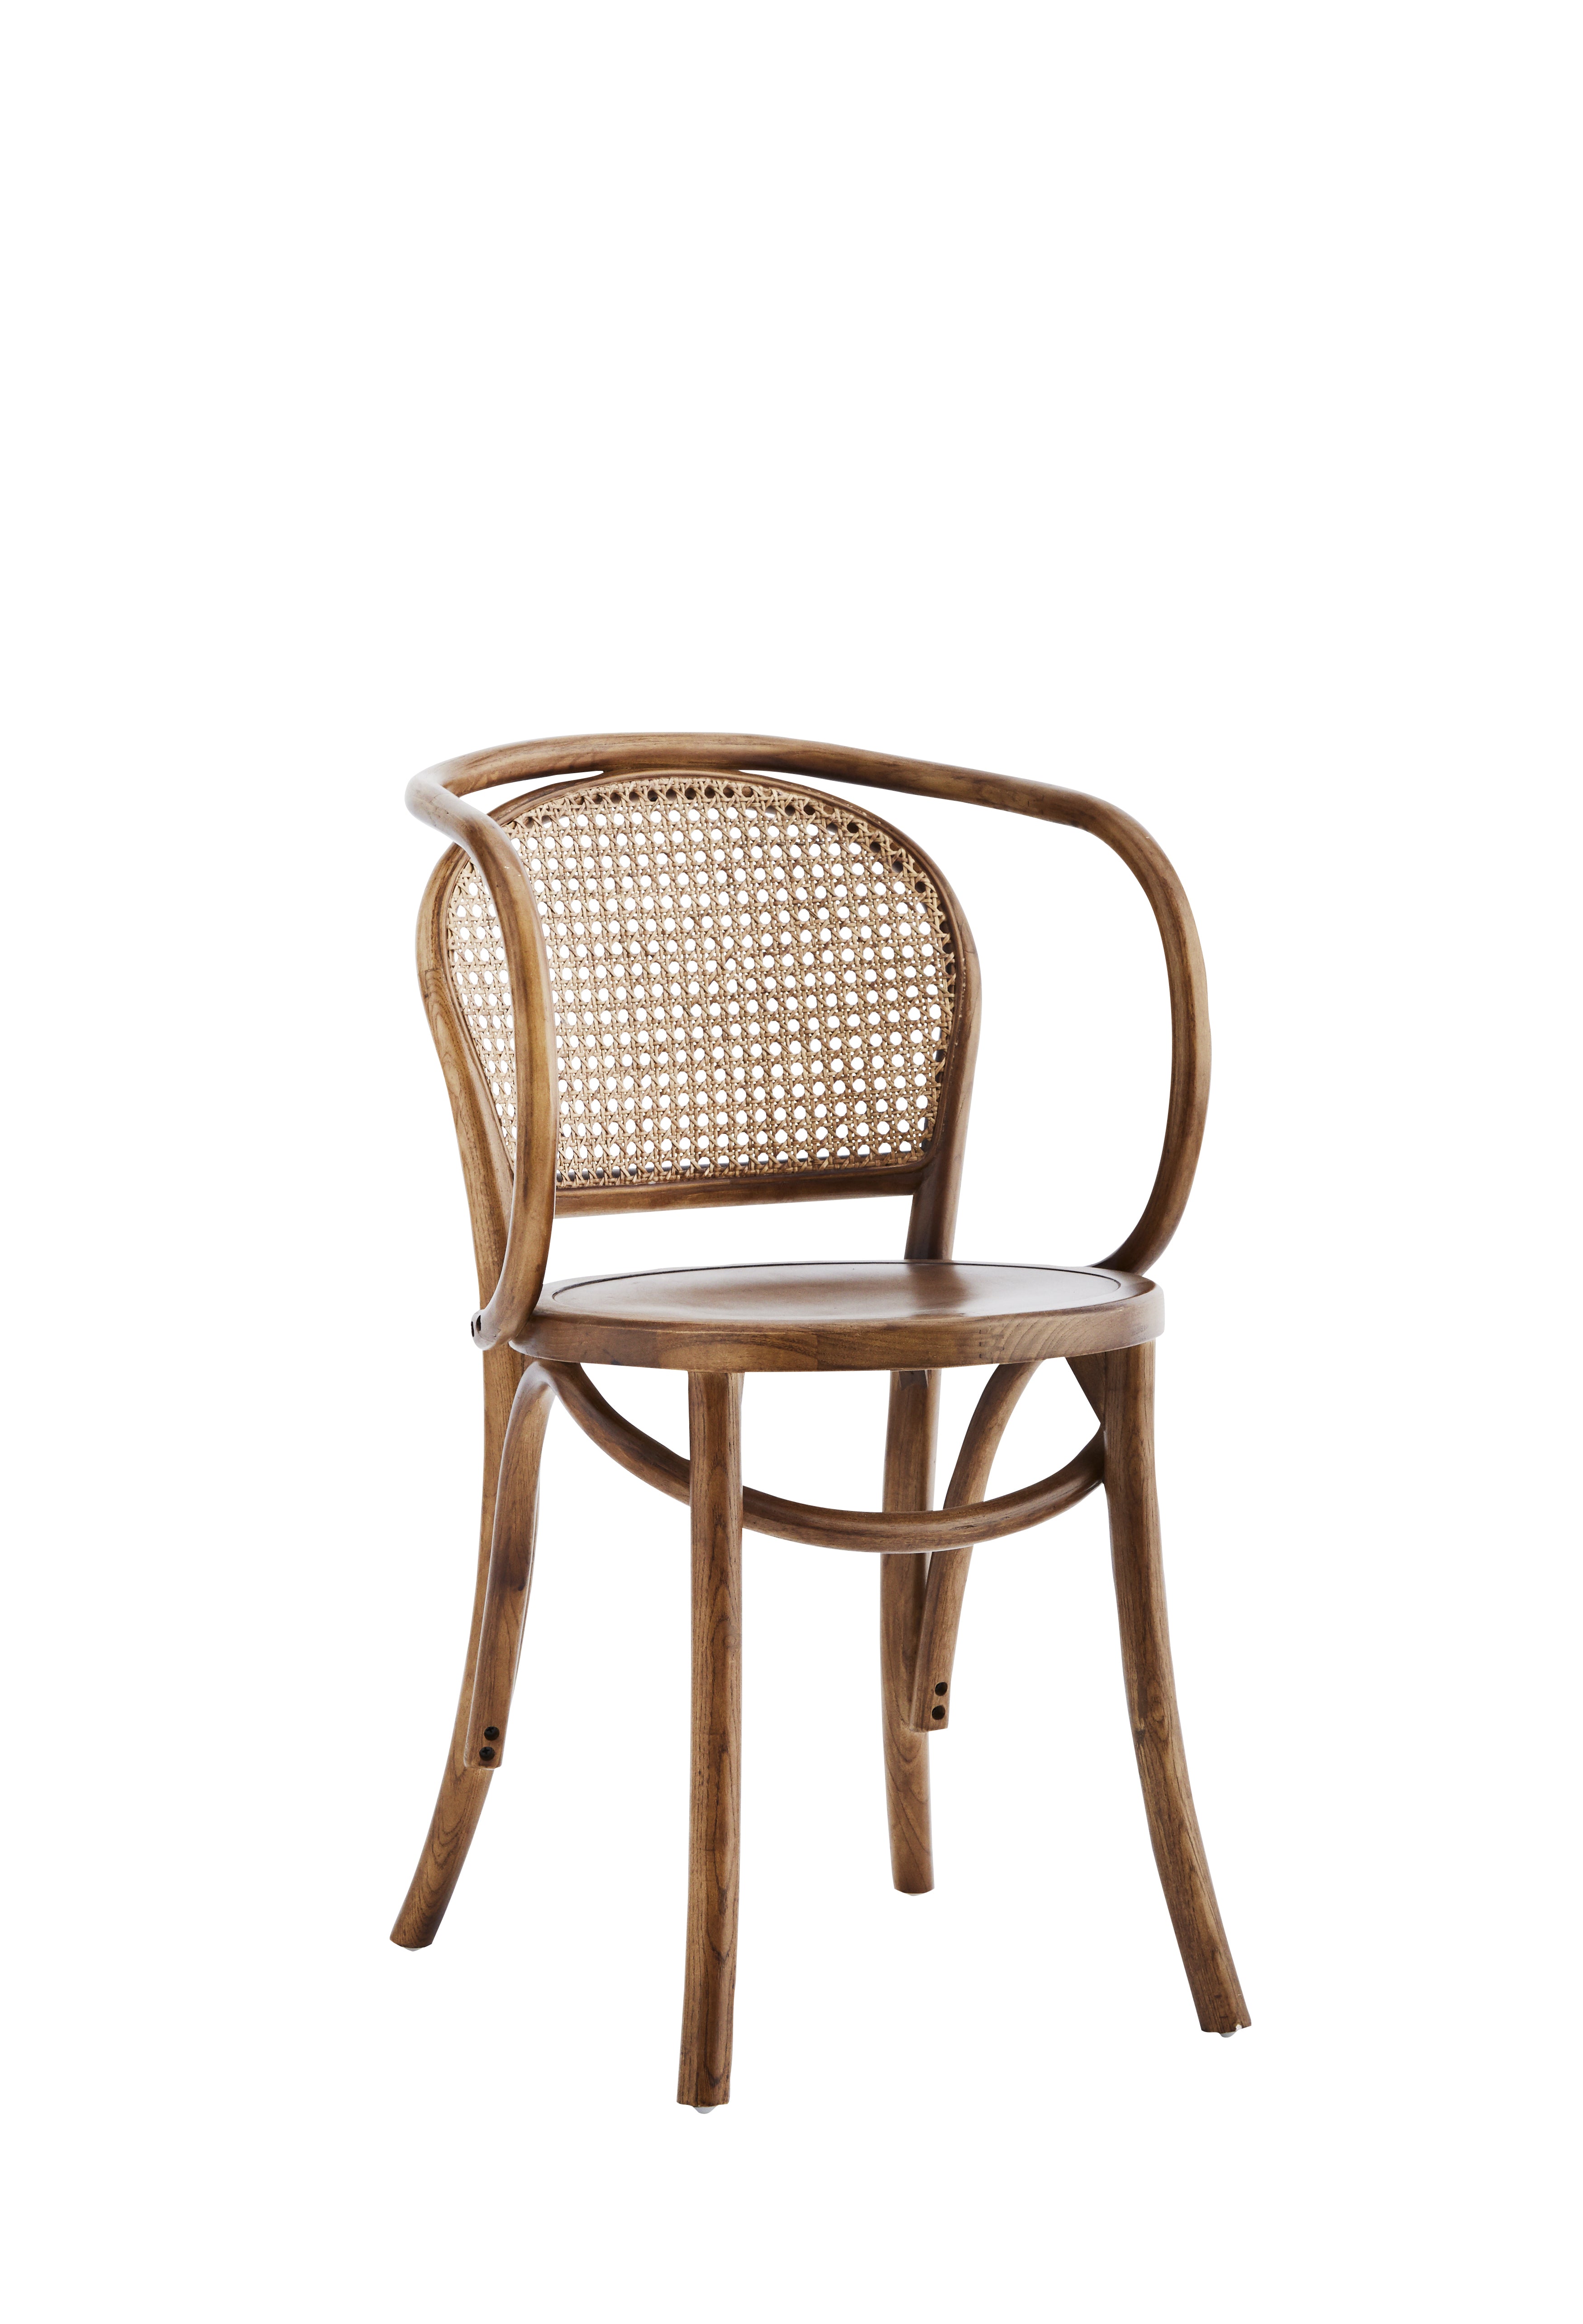 WOODEN CHAIR WITH RATTAN